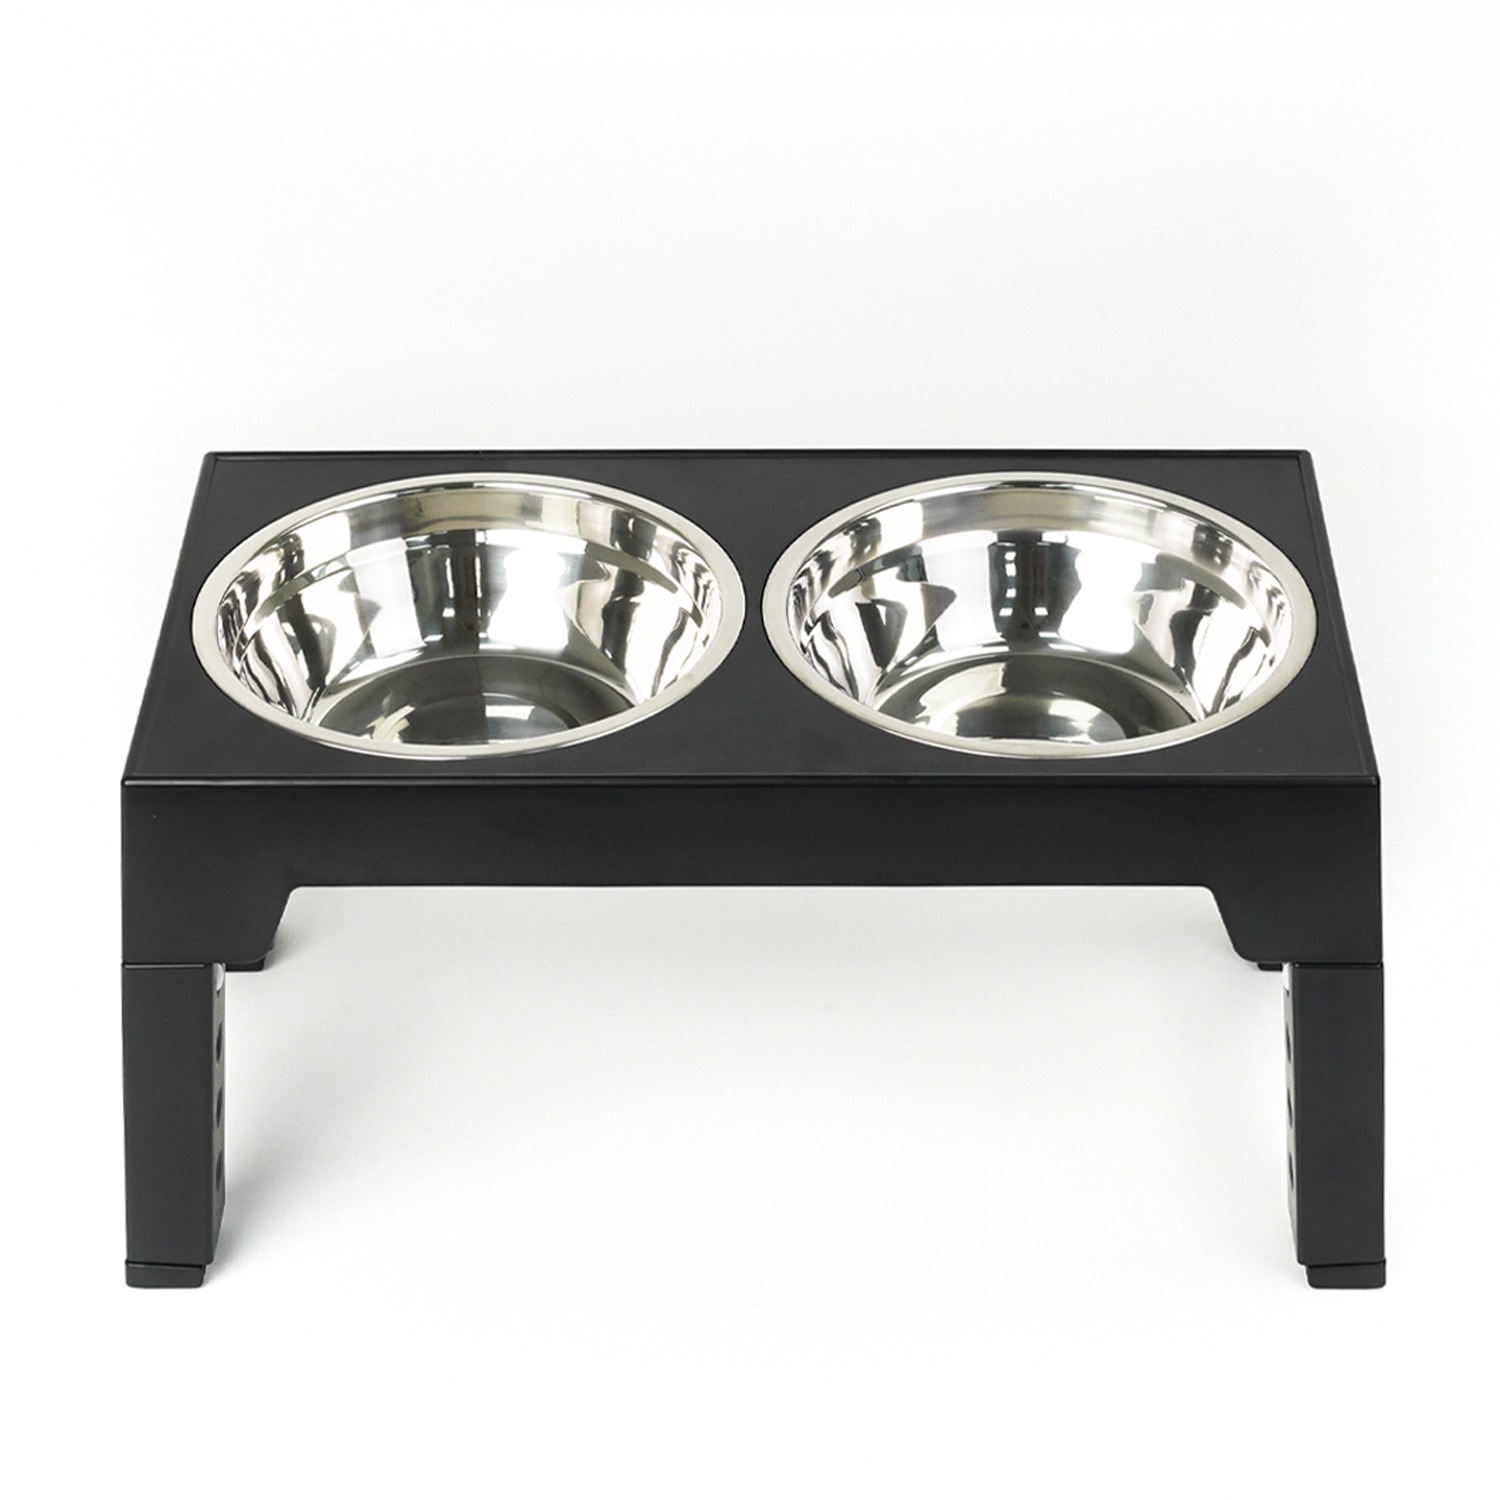 https://www.petzo.net/wp-content/uploads/2023/05/Elevated-Double-Stainless-Steel-Bowl-with-5-Height-Adjustable-Raised-Stand-Dog-Bowl-Black1-min.jpg